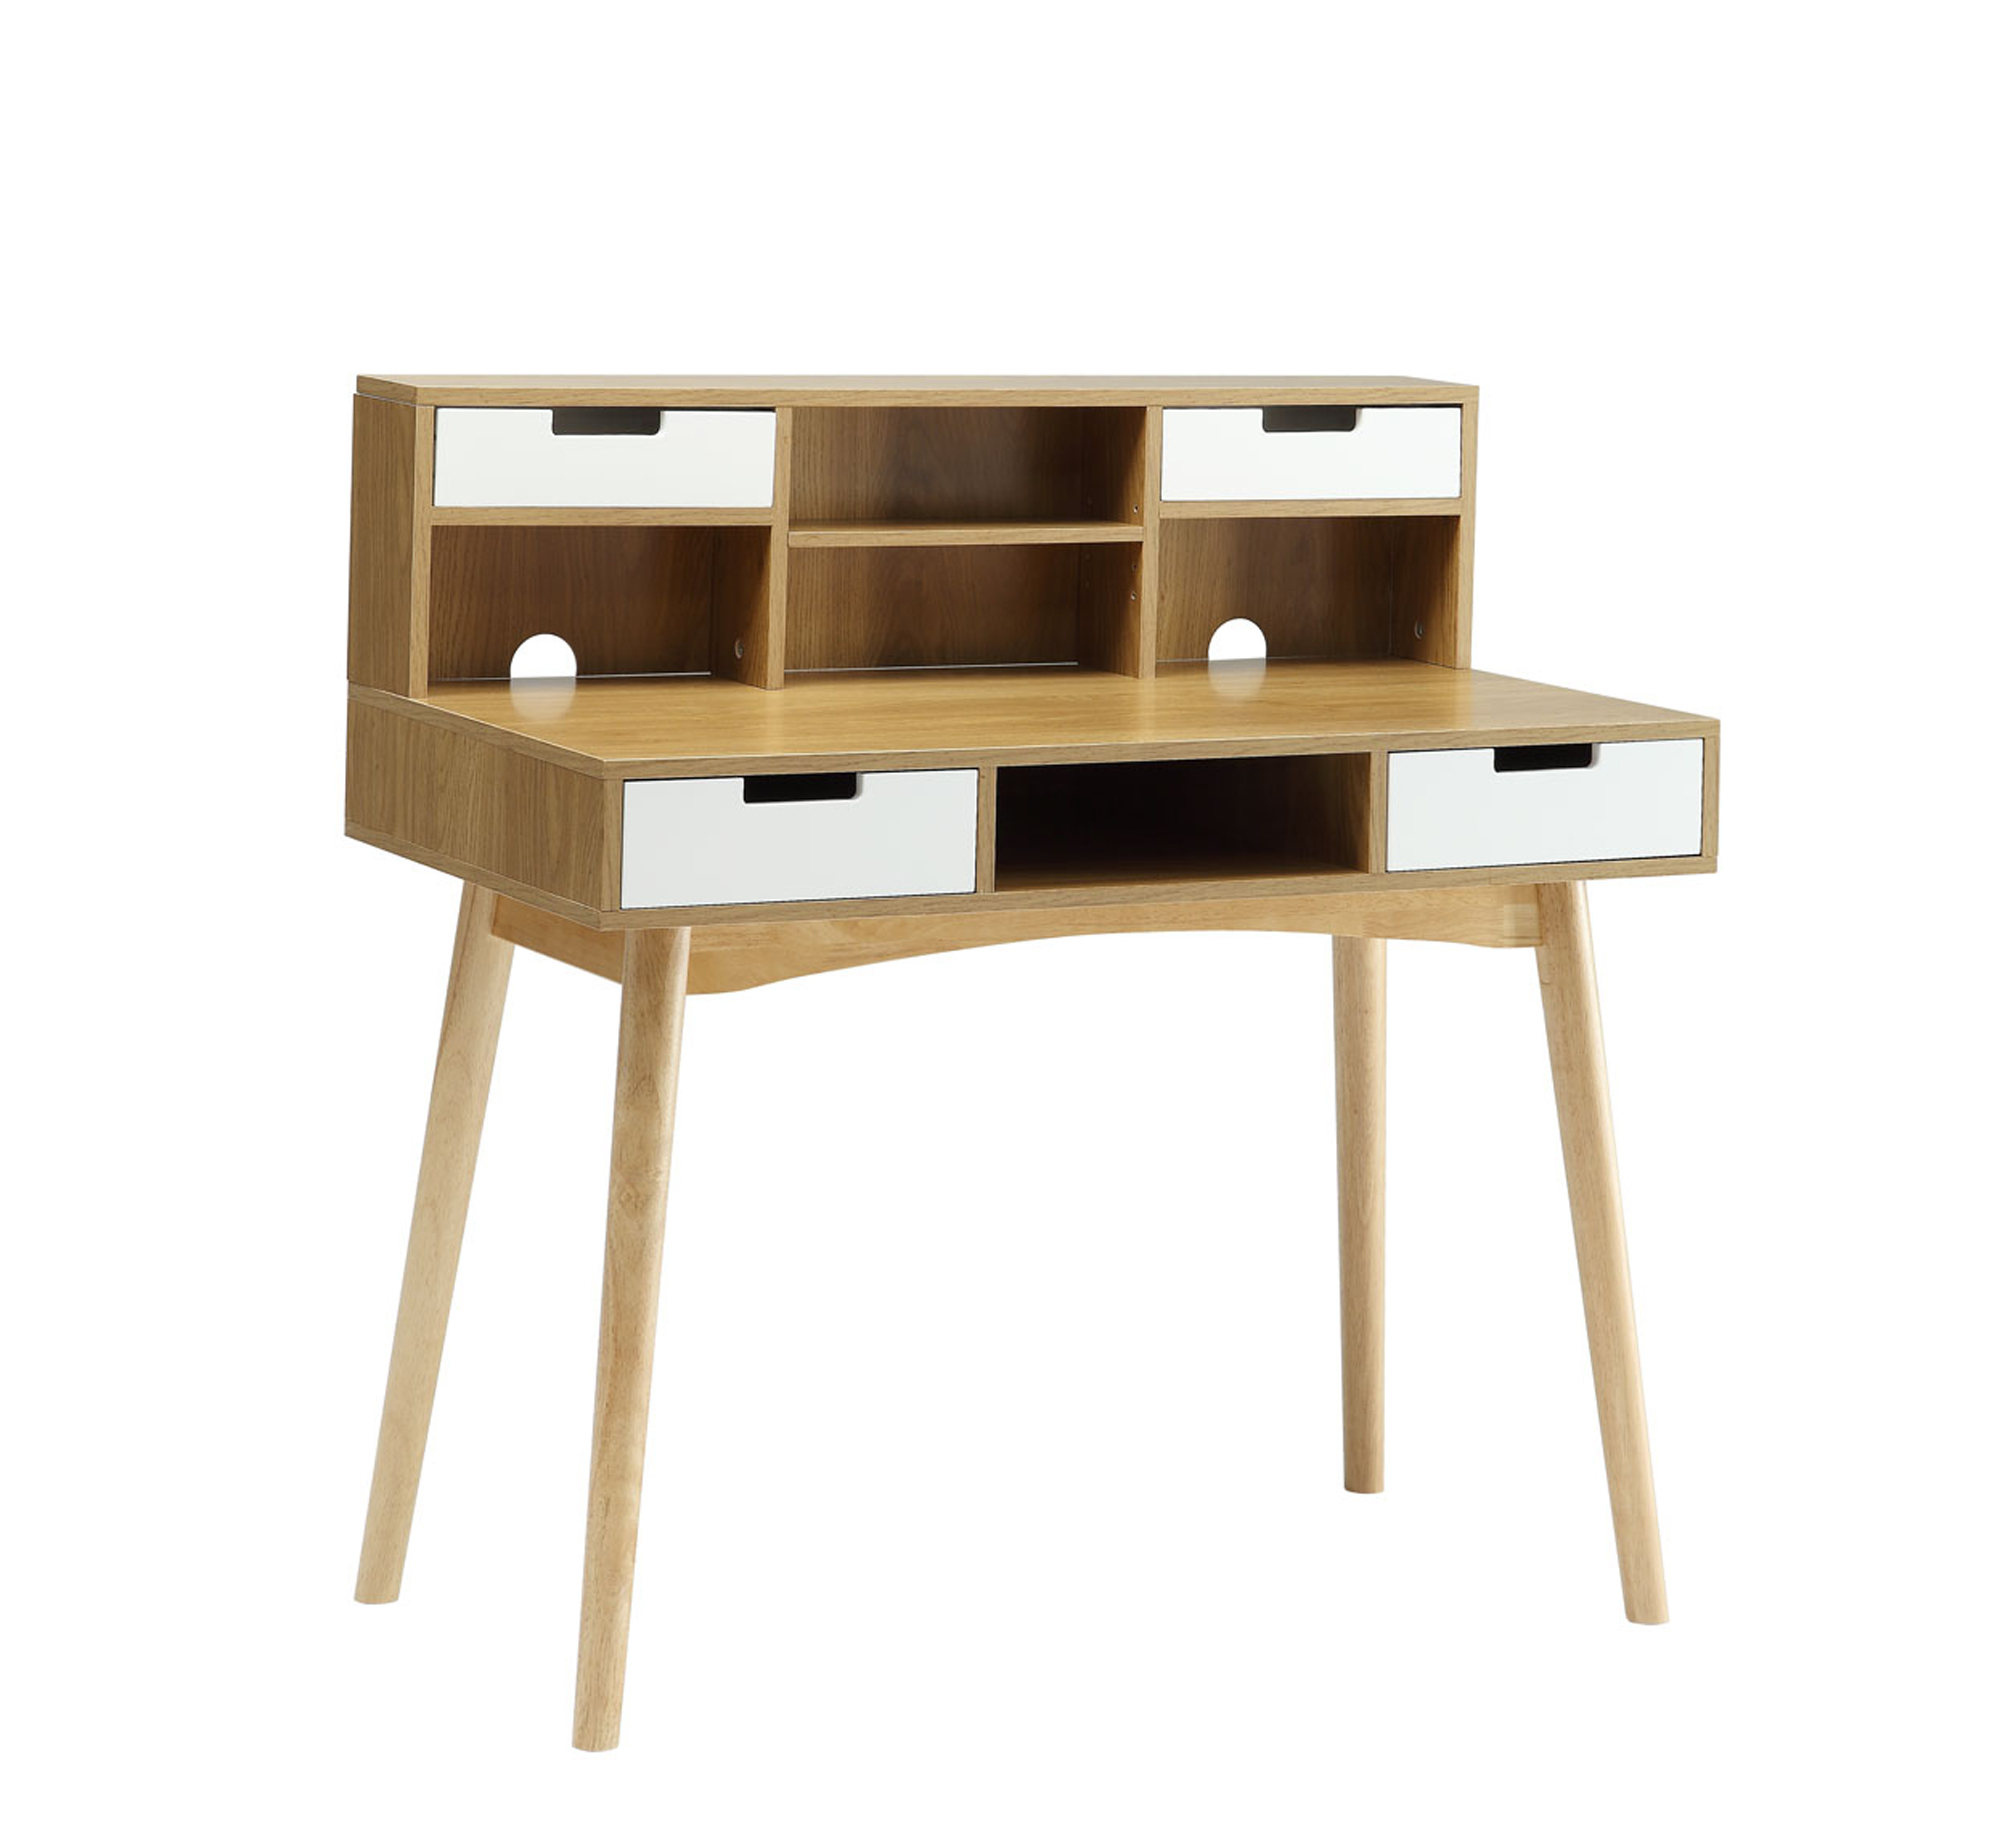 Convenience Concepts Oslo Deluxe Desk with Hutch - image 2 of 3